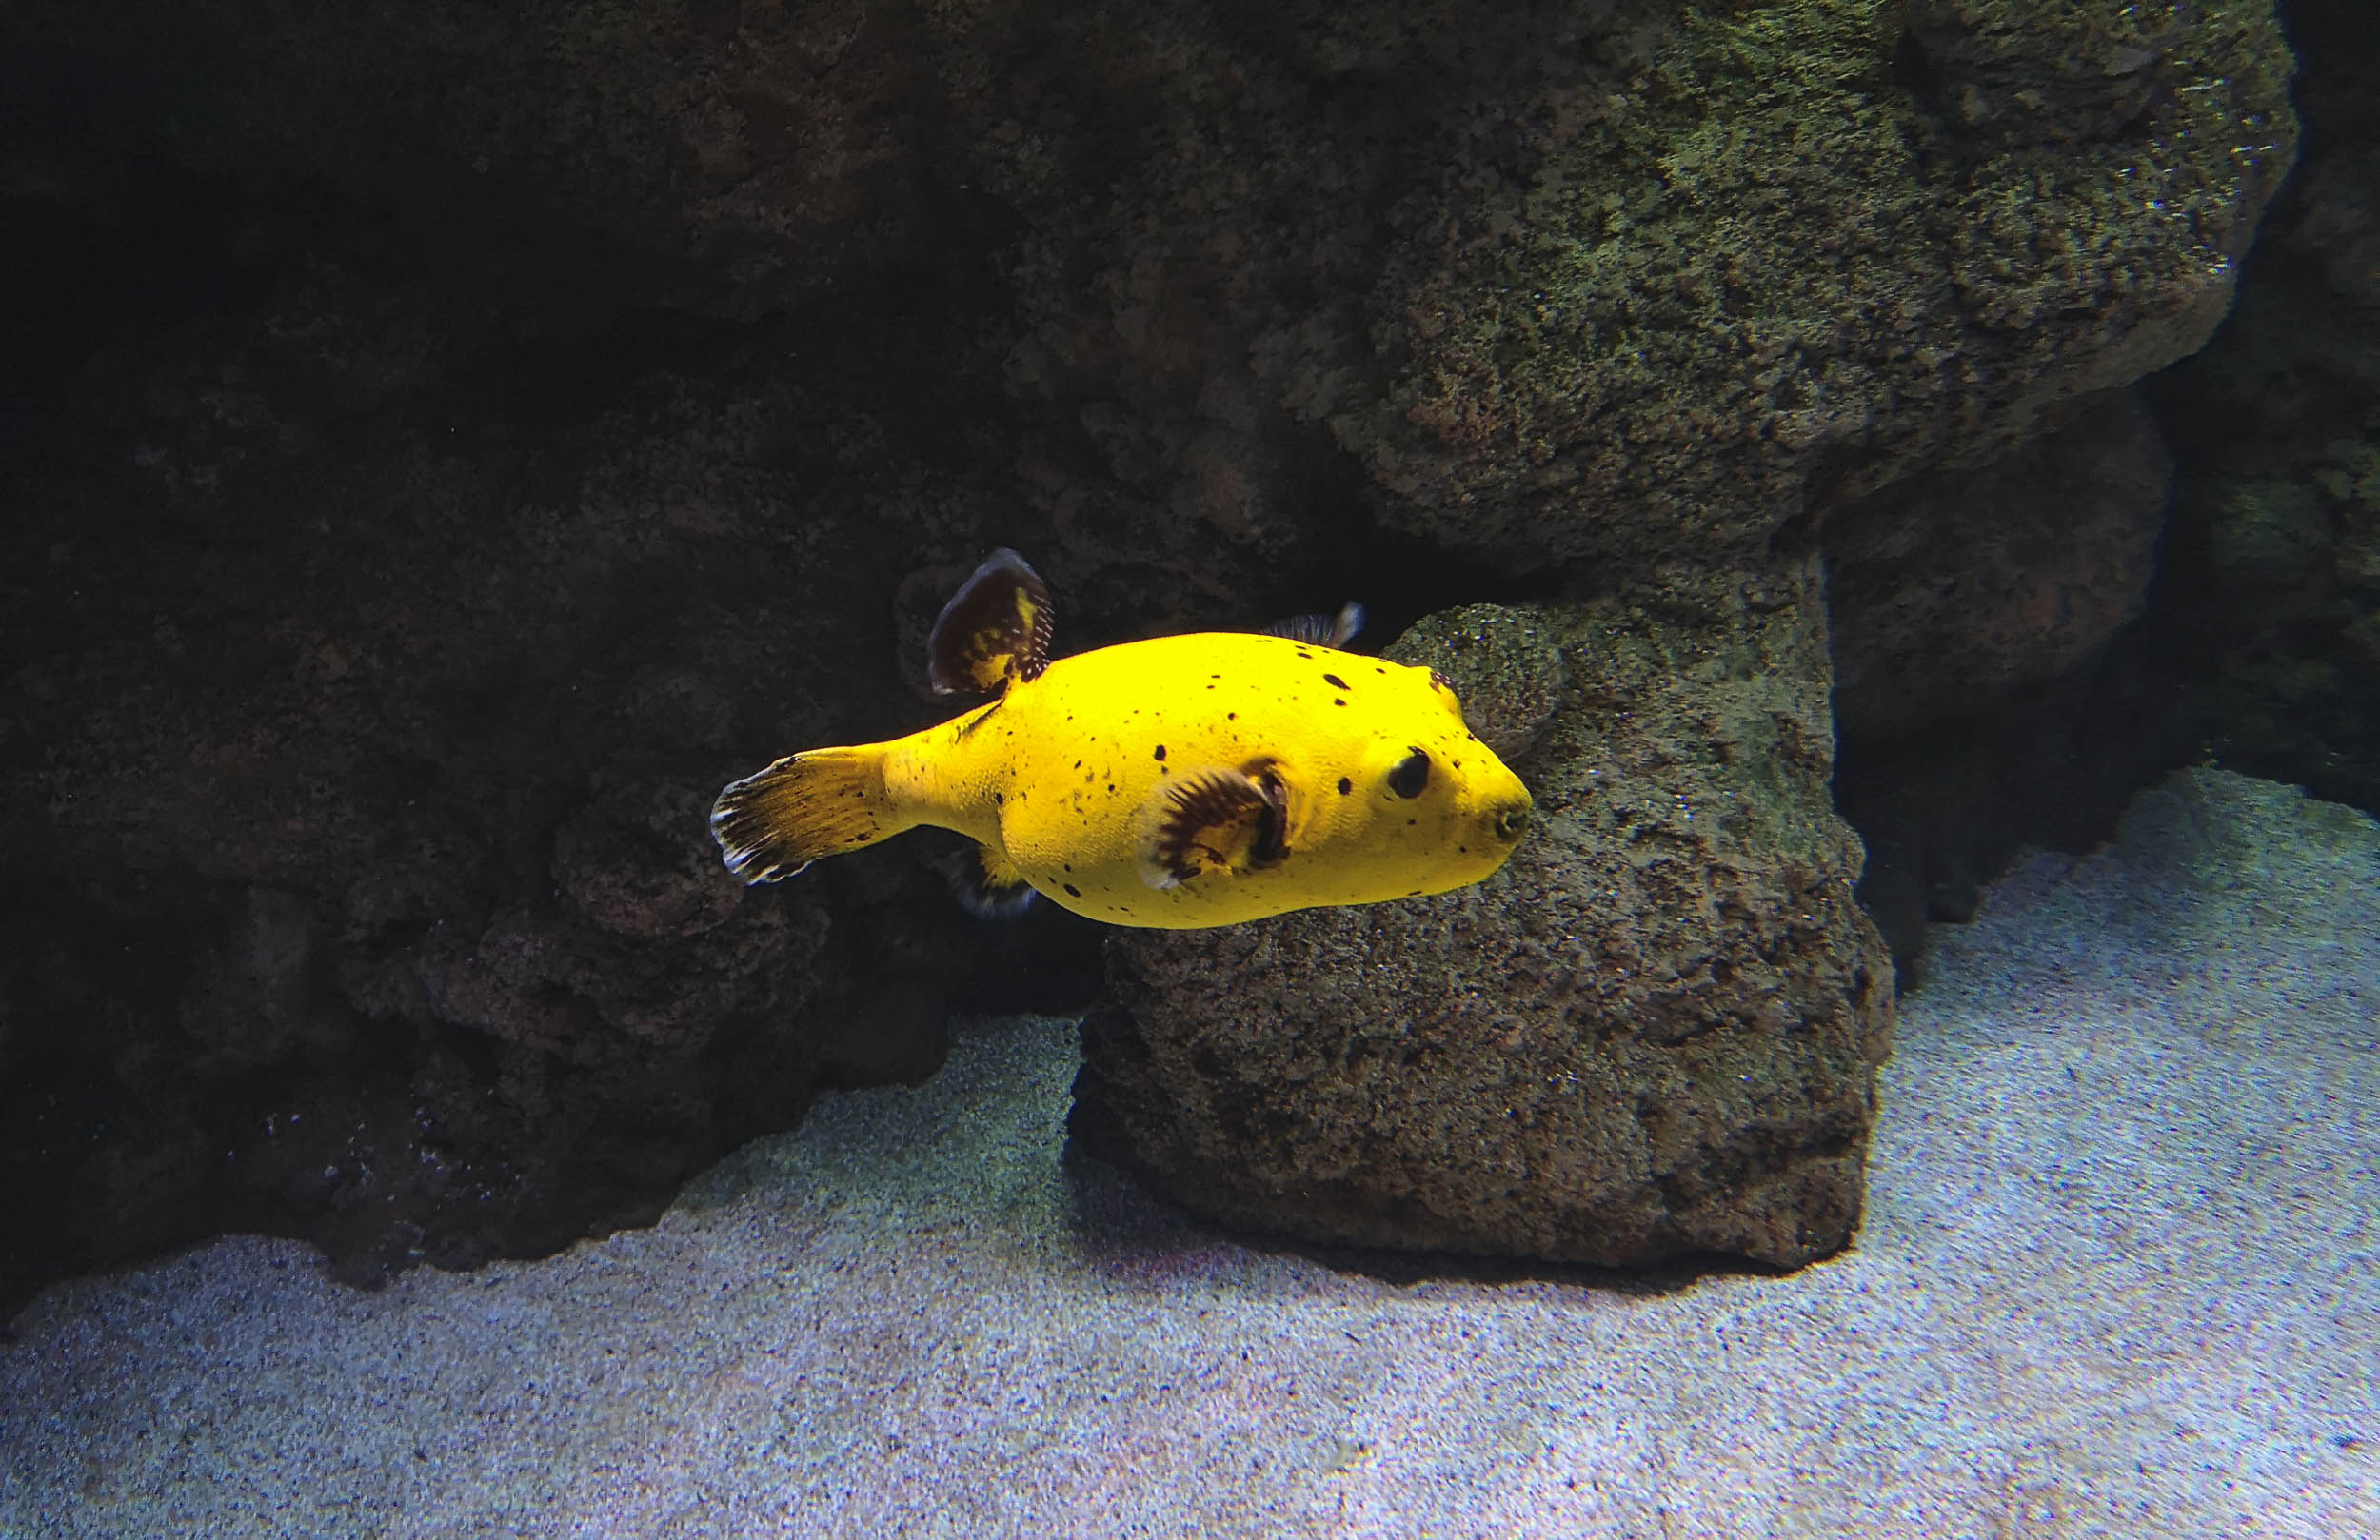 Blackspotted Puffer - Dog-faced Fish of Tropic Seas - Connecting the Dots